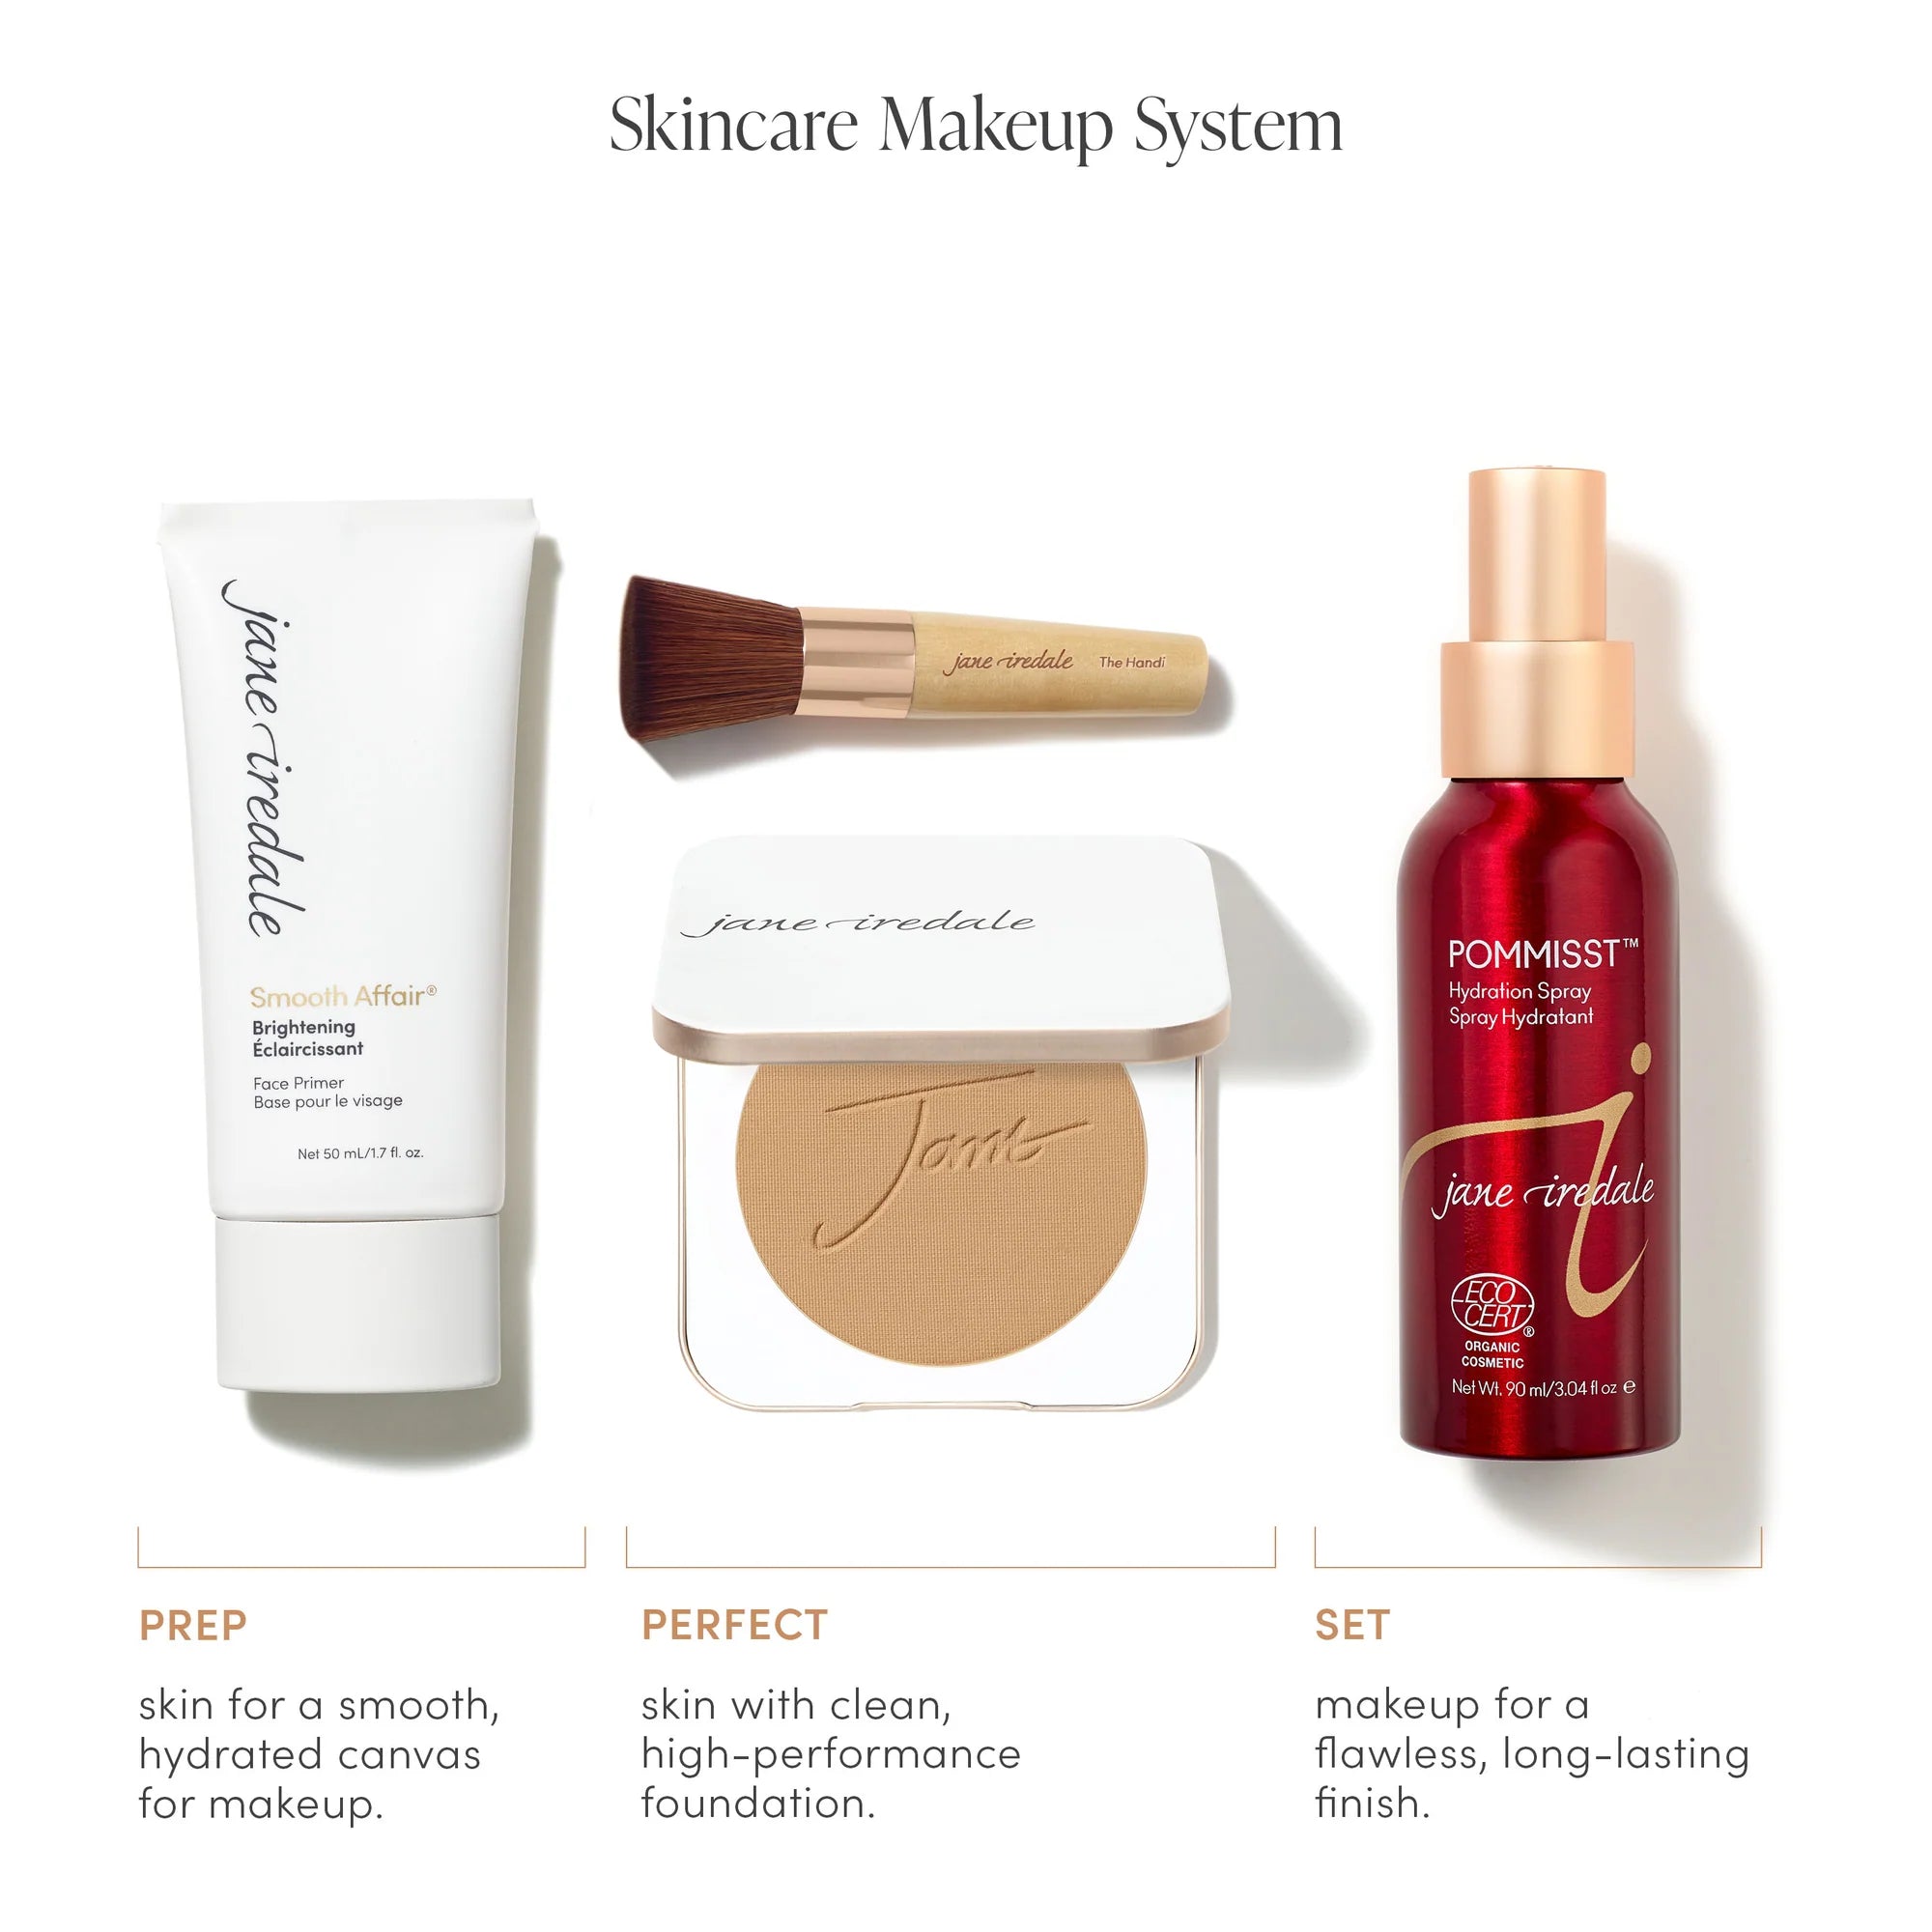 Jane Iredale's Skincare Makeup System